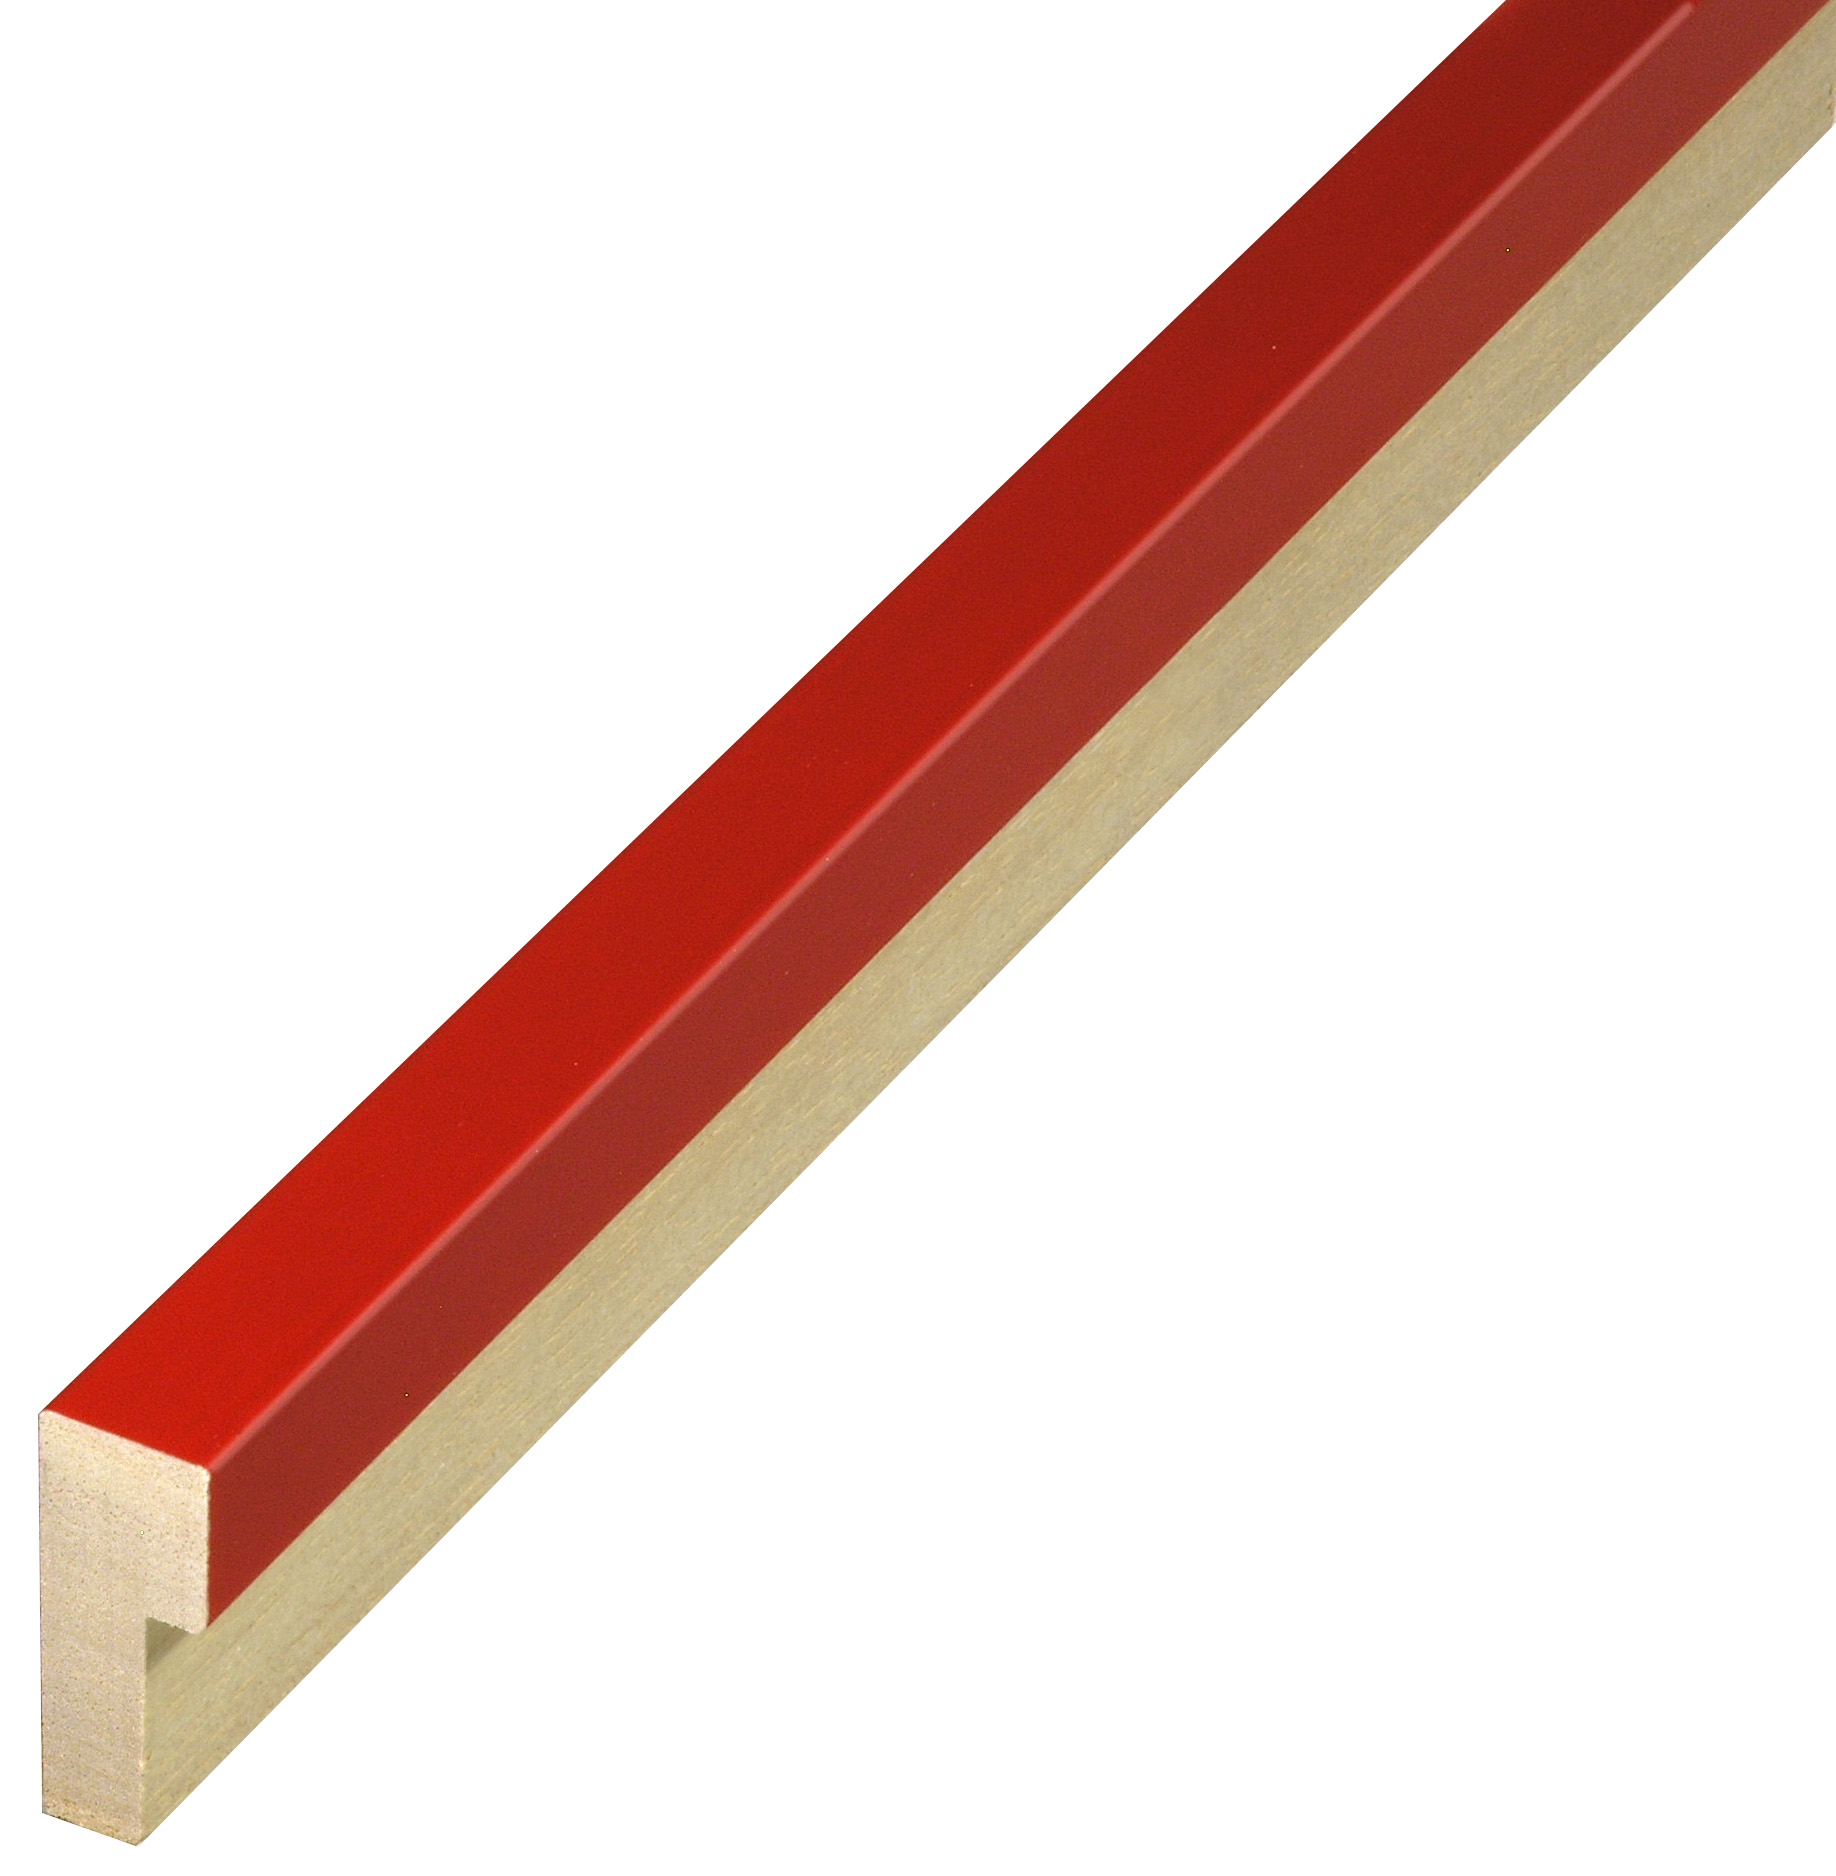 Moulding ayous - Widht 15 mm - Height 40 mm - Red